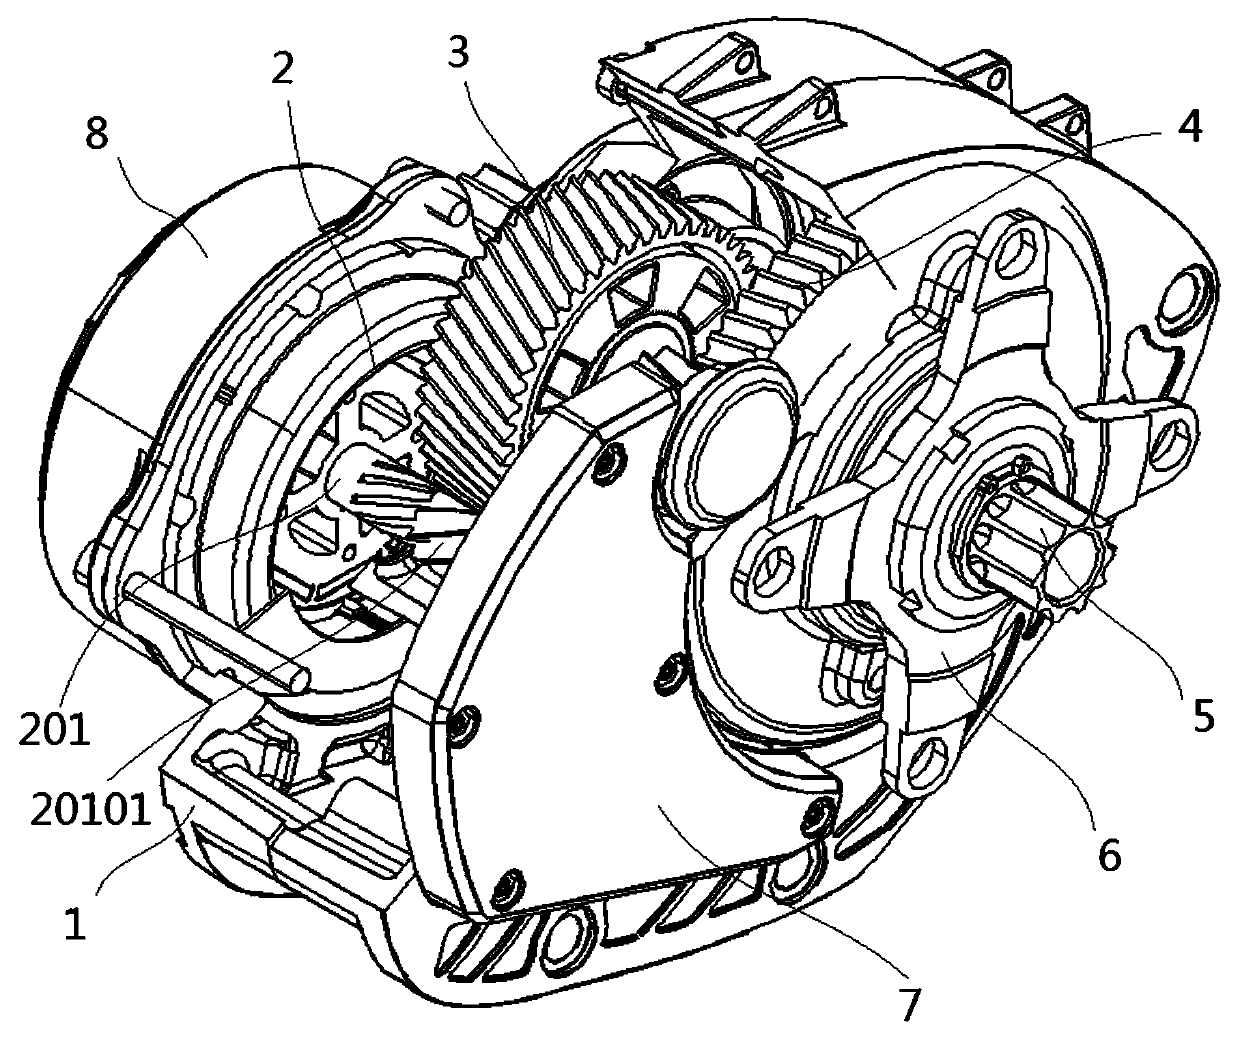 Two-stage transmission middle motor of moped